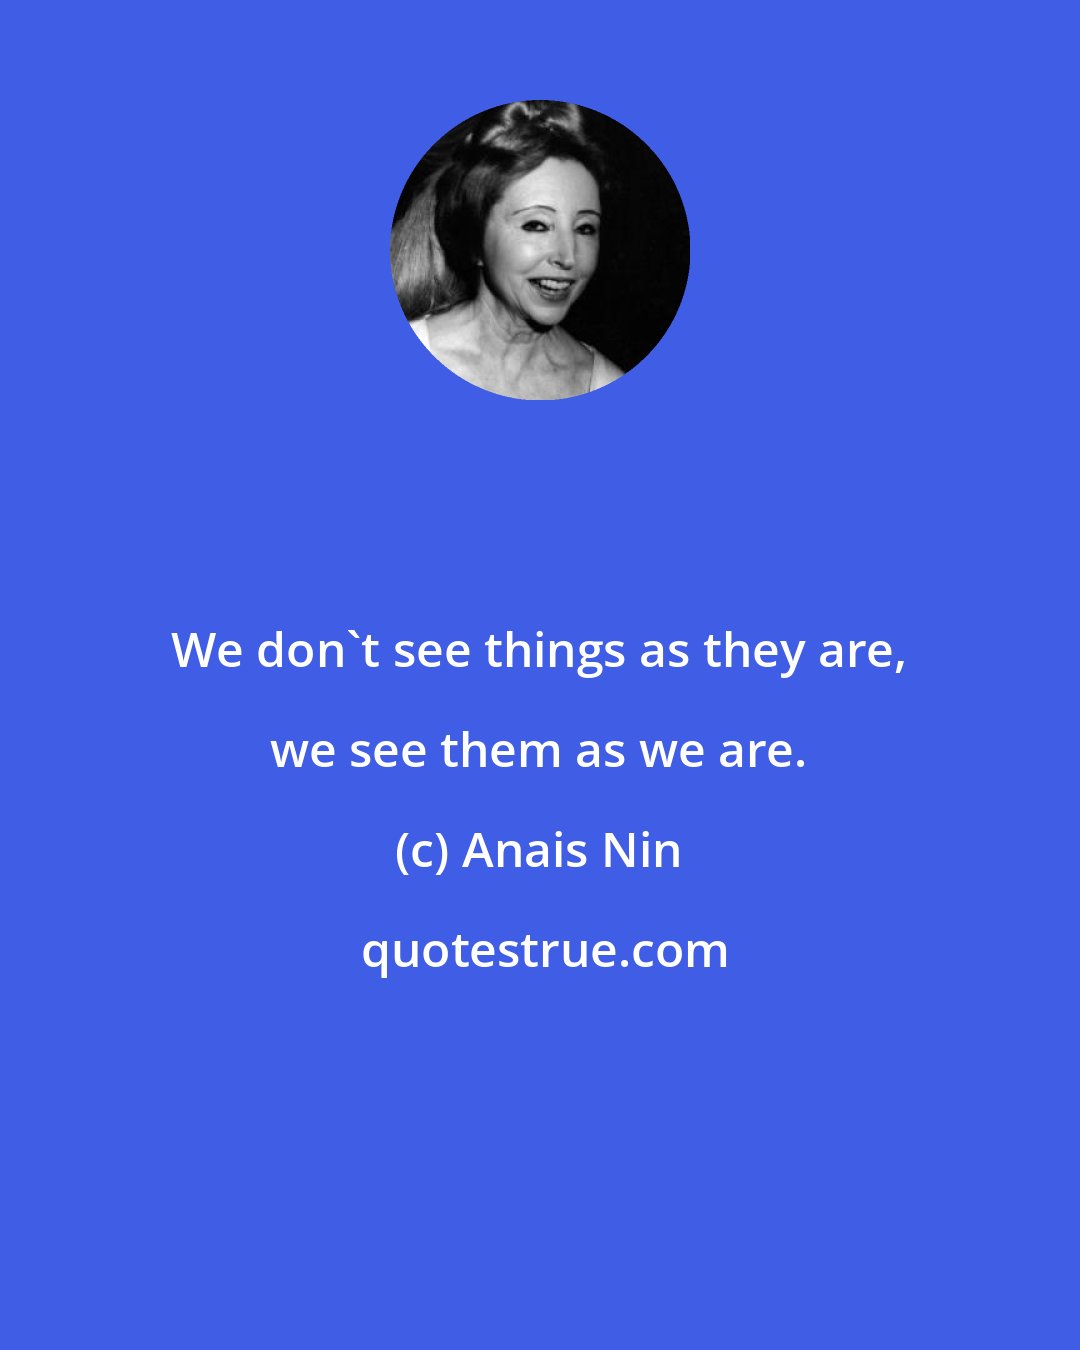 Anais Nin: We don't see things as they are, we see them as we are.